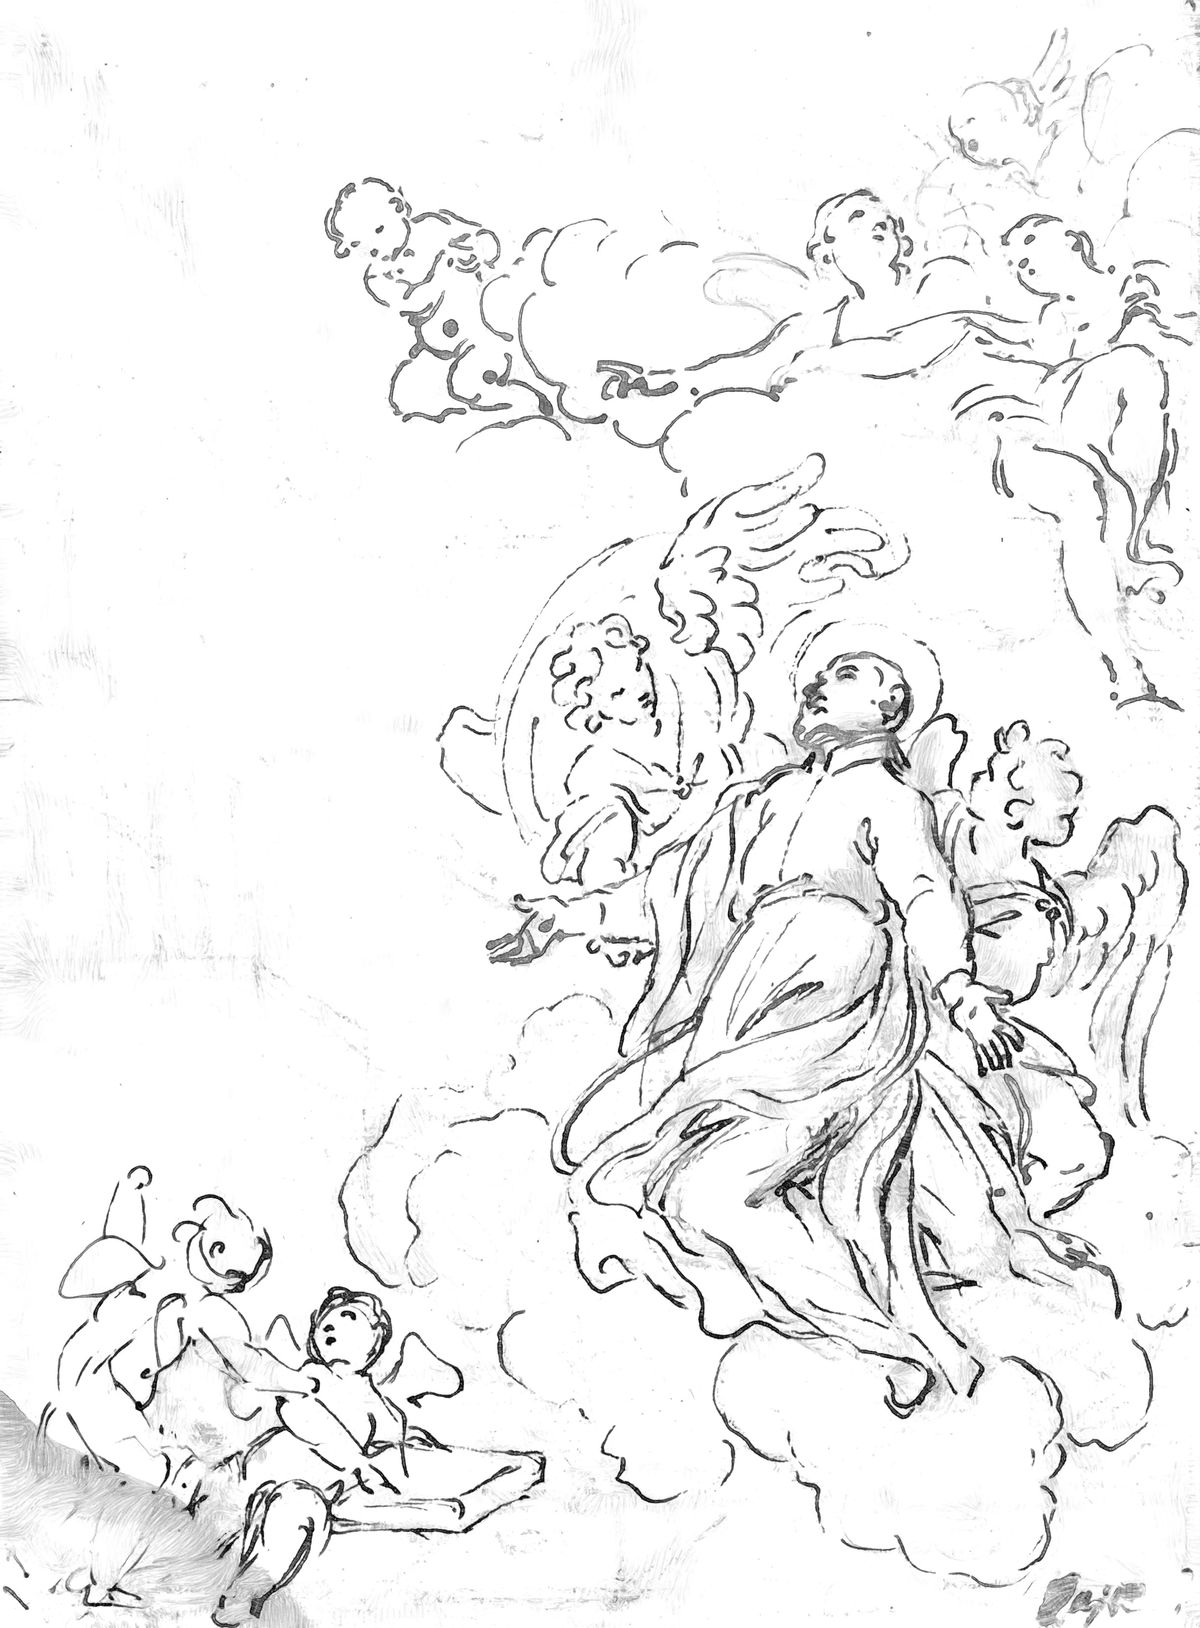 Vision of a Saint (mid-17th century) by Giovanni Battista Passeri - Catholic Coloring Page